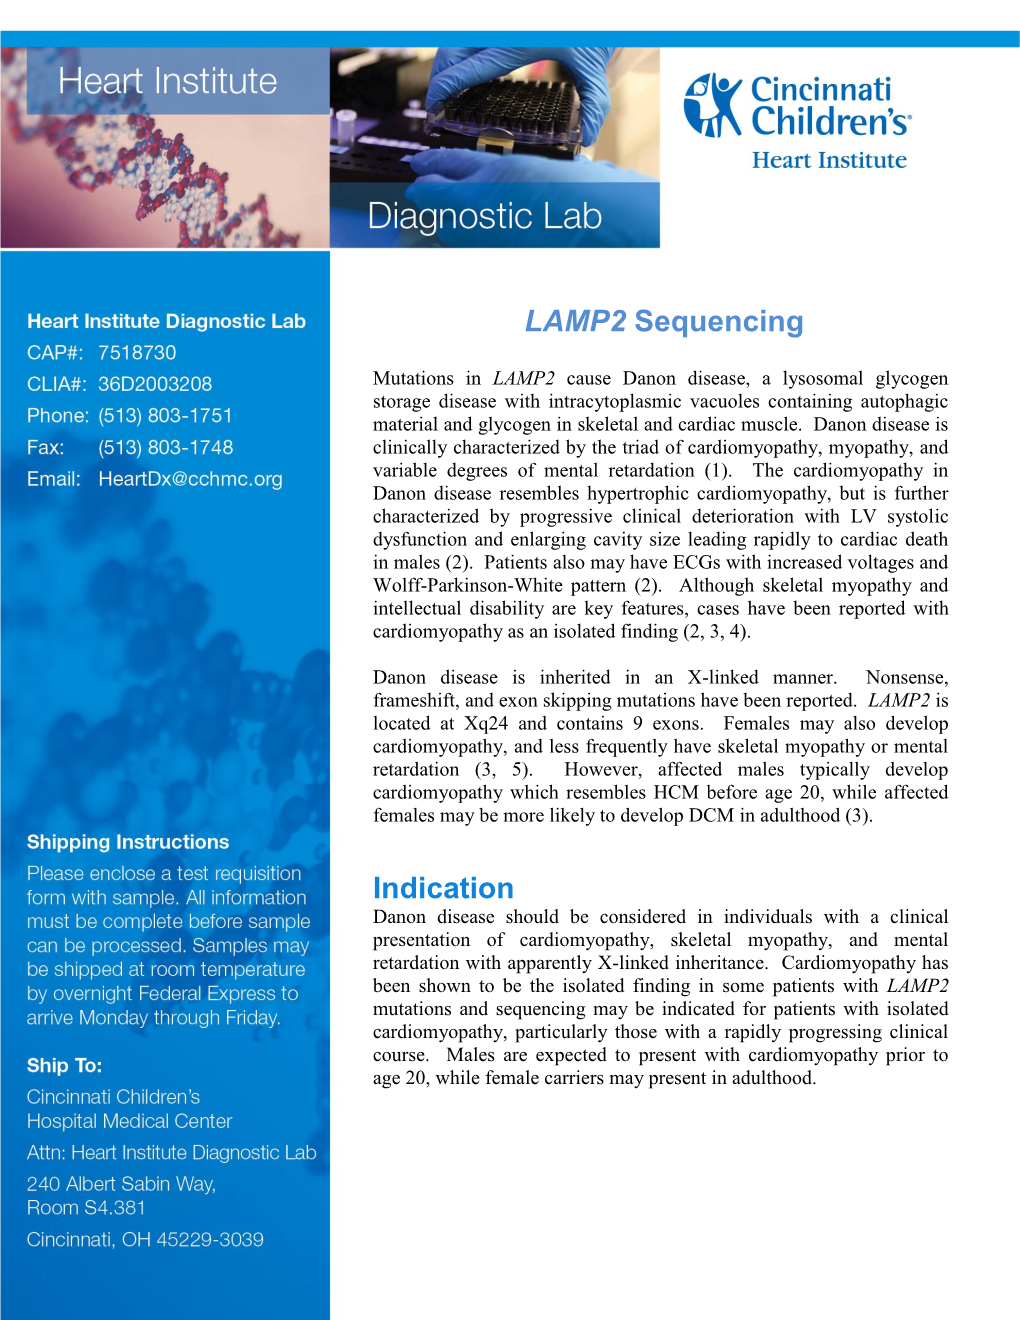 LAMP2 Sequencing Indication